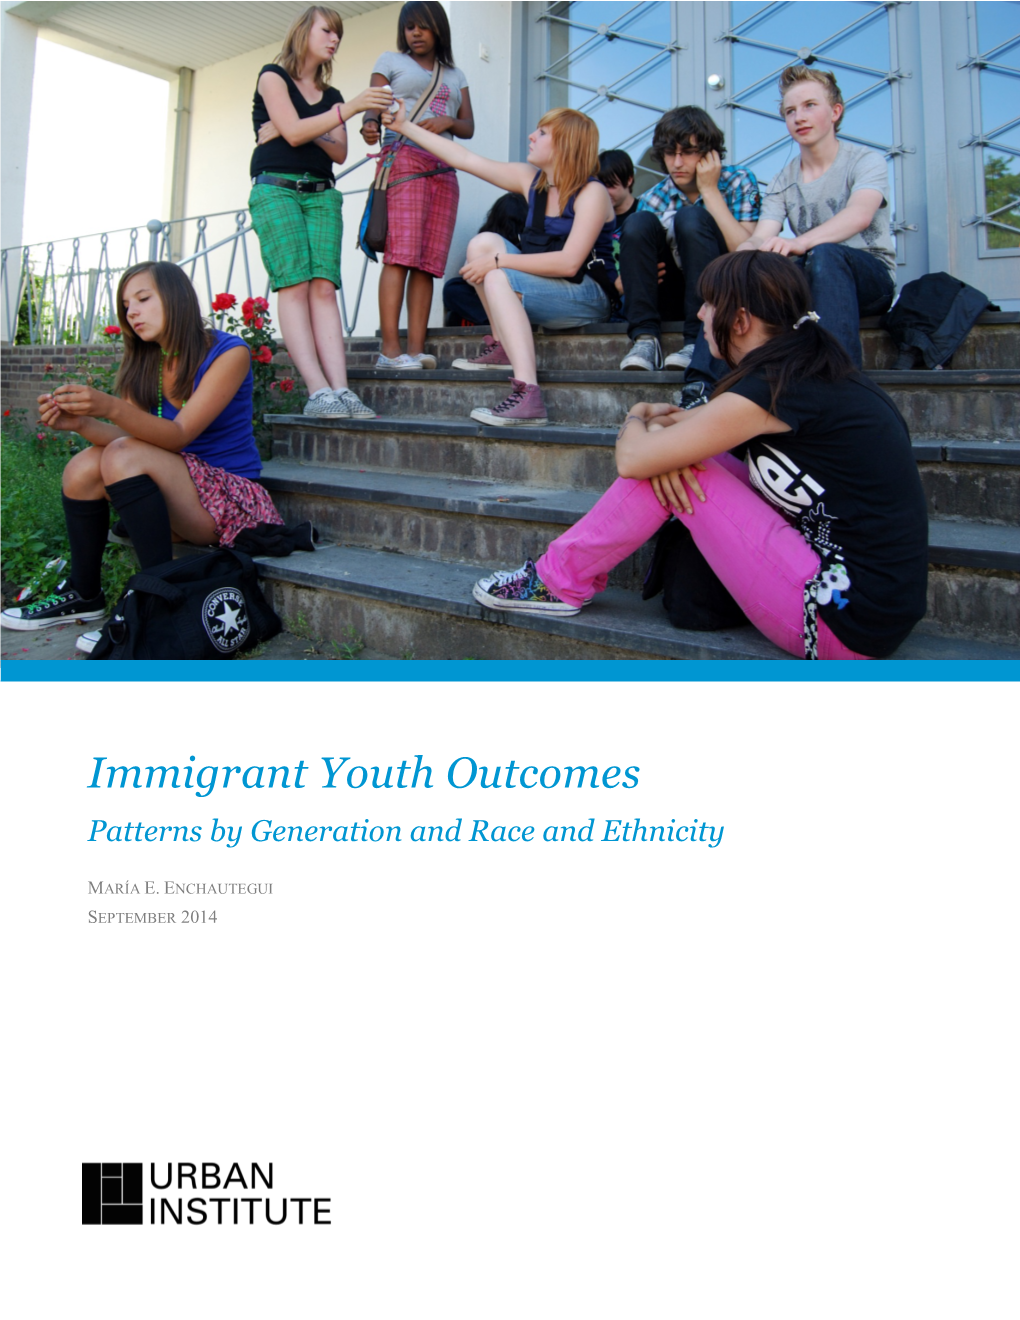 Immigrant Youth Outcomes: Patterns by Generation and Race and Ethnicity